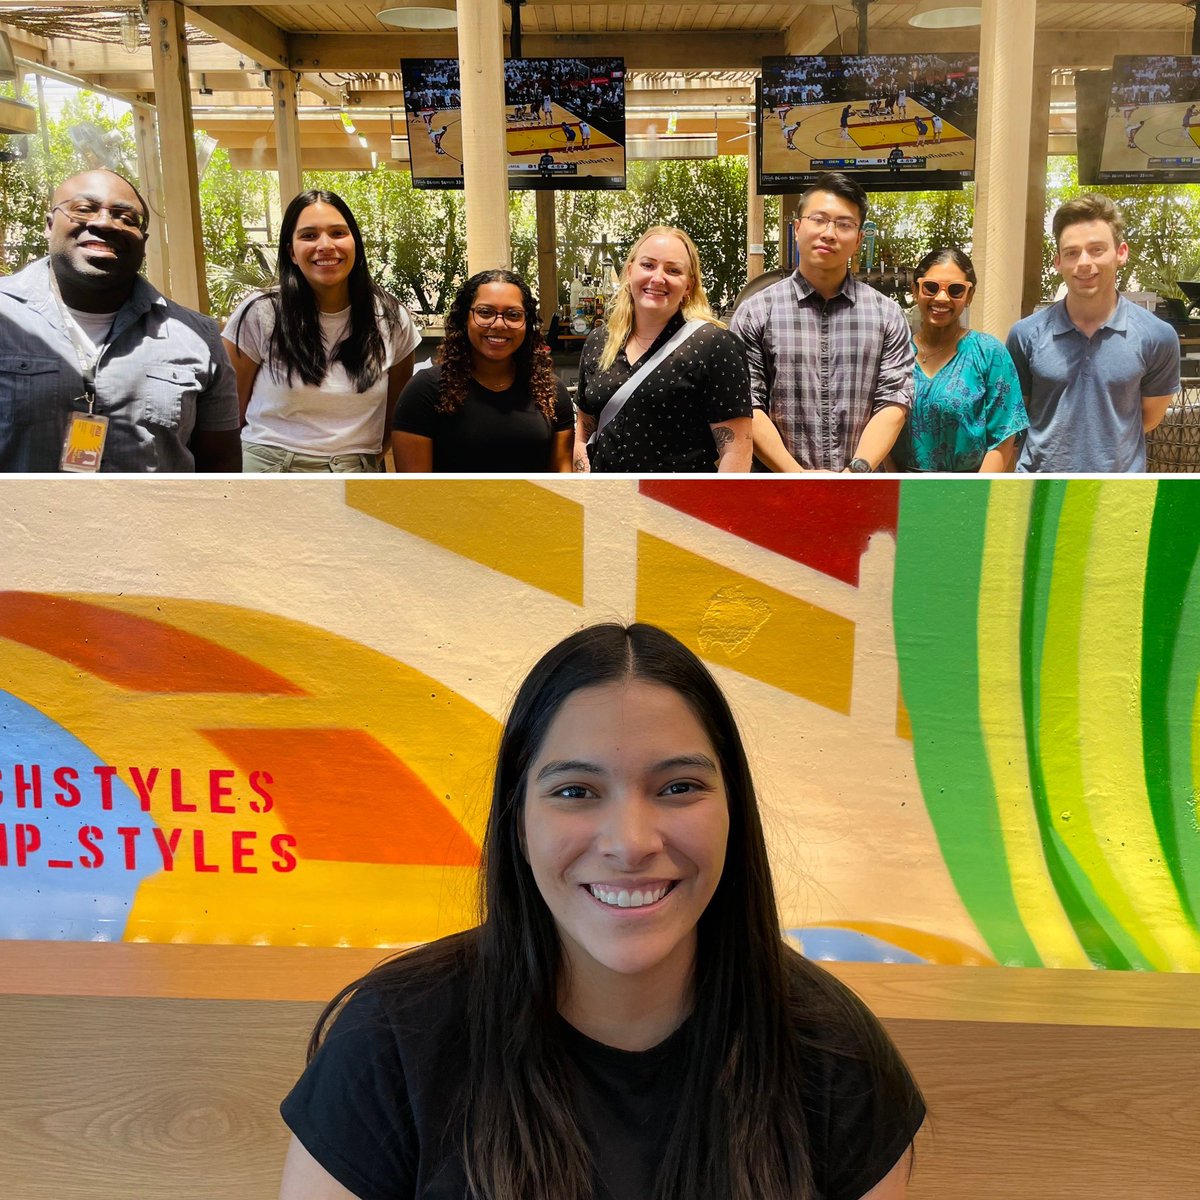 Welcome to @asuhealth to @BUILDingSchUTEP scholar Anamaria Solis- who will be joining us & Dr. Ofori’s lab research team for the summer! @NIHdpc #whatascientistlookslike